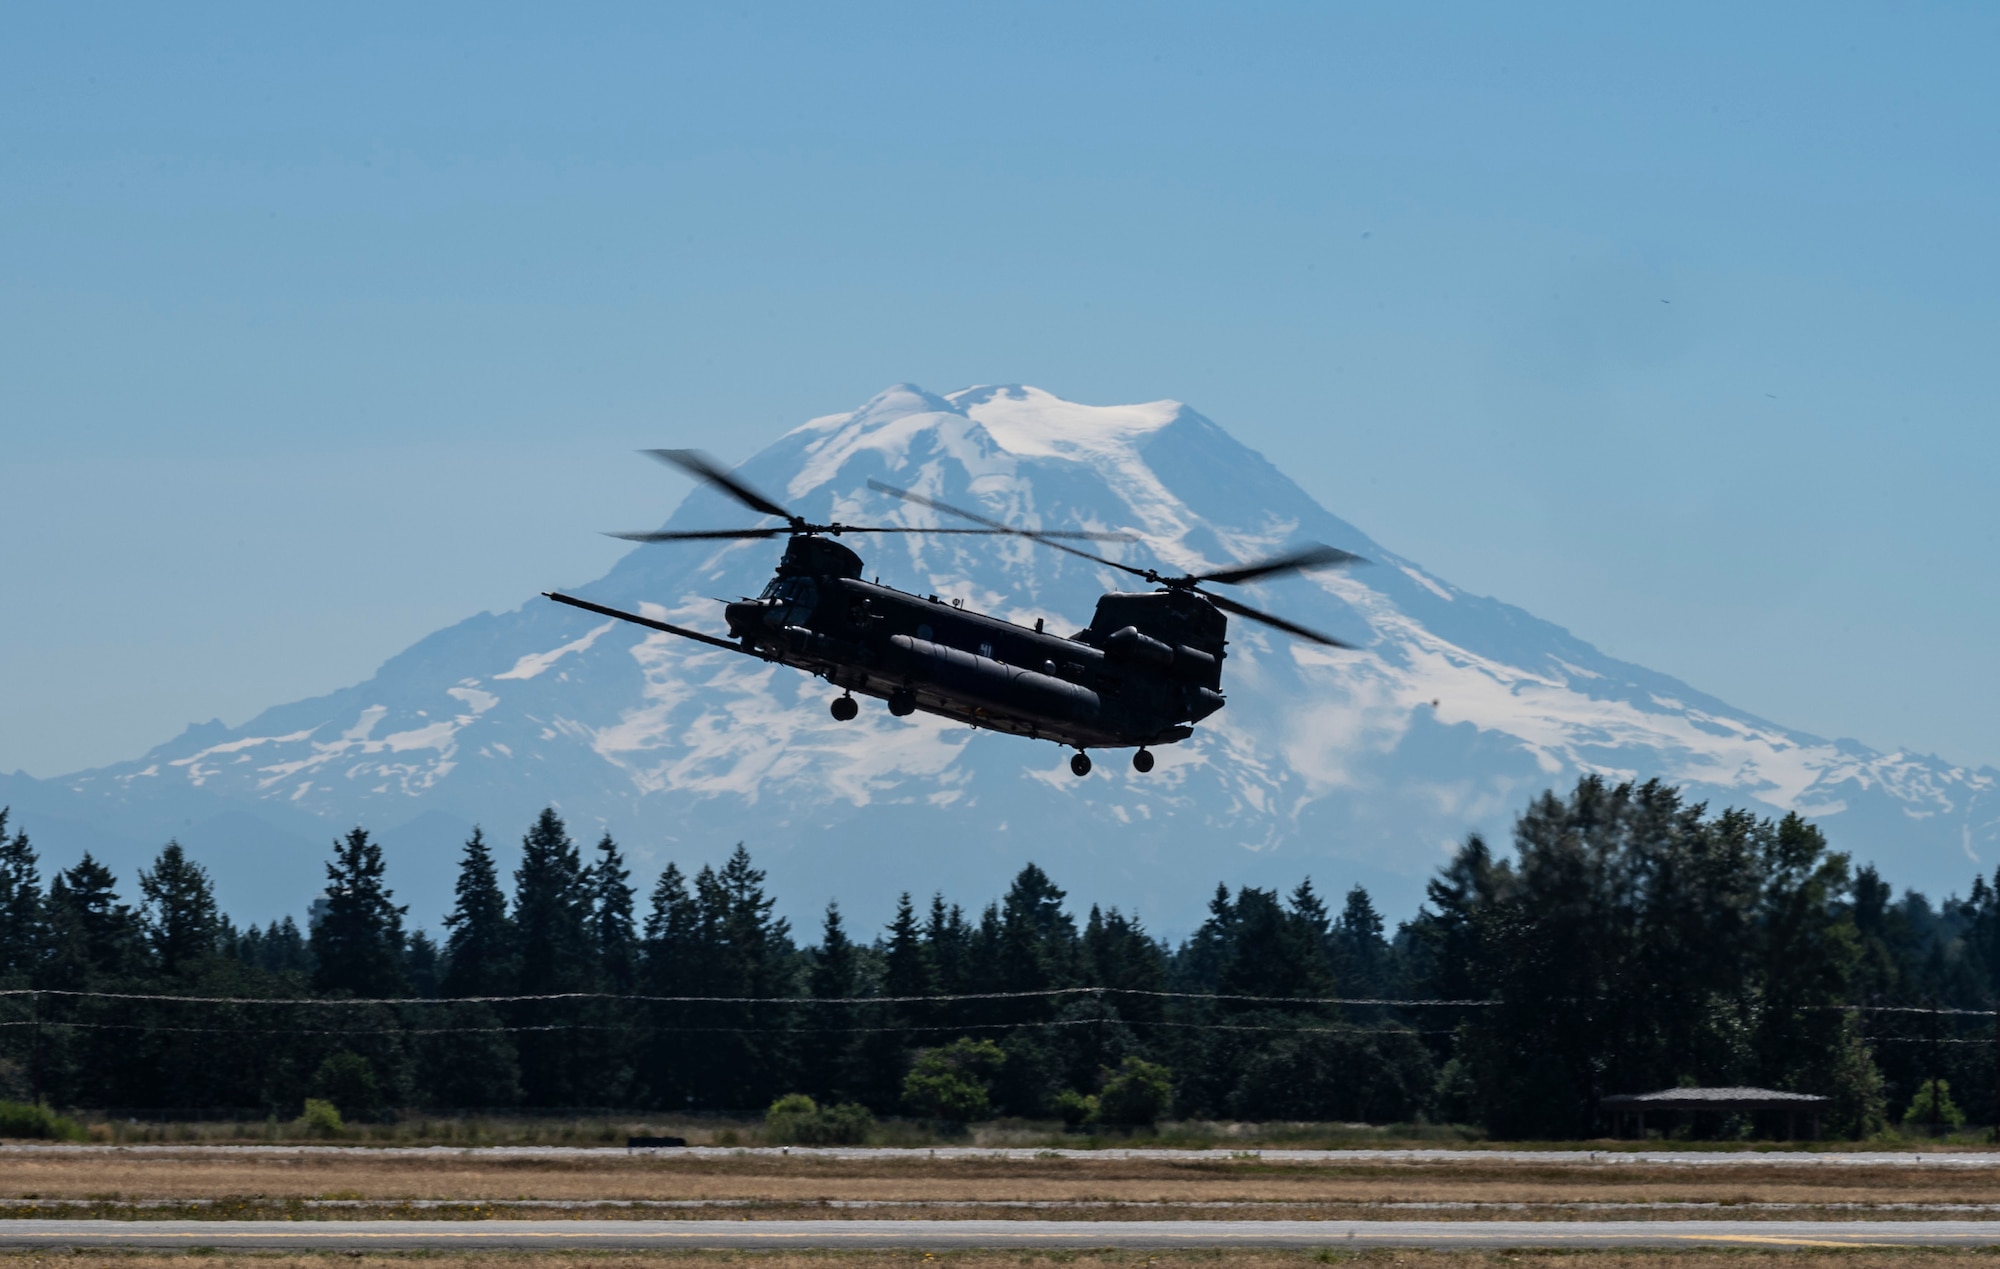 A U.S. Army MH-47 Chinook flies above the McChord Field flightline while practicing for the Joint Base Lewis-McChord Airshow and Warrior Expo at JBLM, Washington, July 14, 2023. The mission of the JAWE is to foster goodwill to educate and familiarize attendees with the people, mission, and equipment of the Air Force, Army, and other Armed Services while continuing to provide installation-wide mission support. (U.S. Air Force photo by Staff Sgt. Rachel Williams)